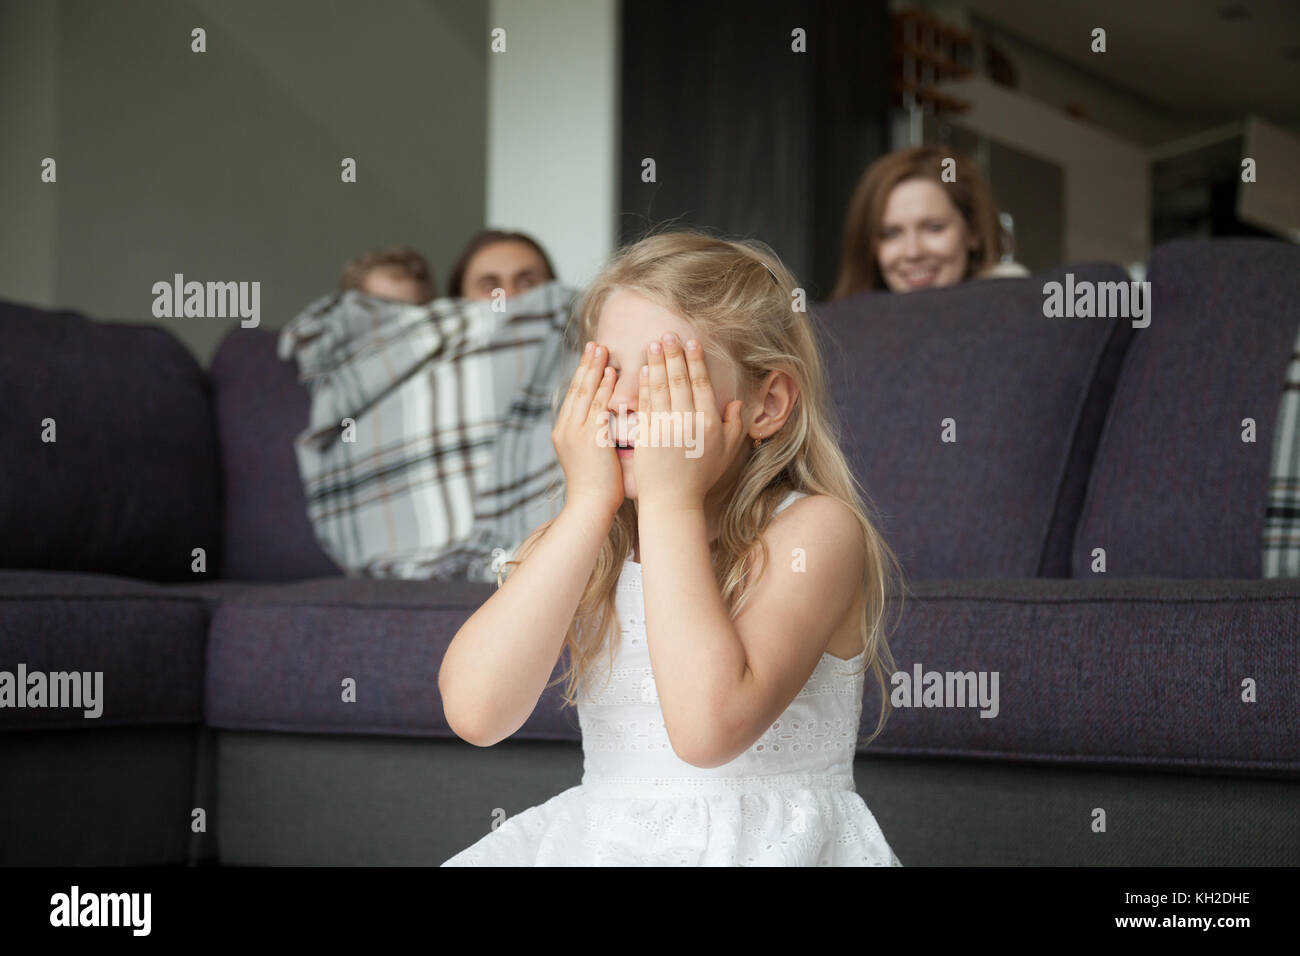 Little girl closing eyes covering face with hands playing hide and seek game with parents and brother hiding behind sofa peeking out in living room, h Stock Photo